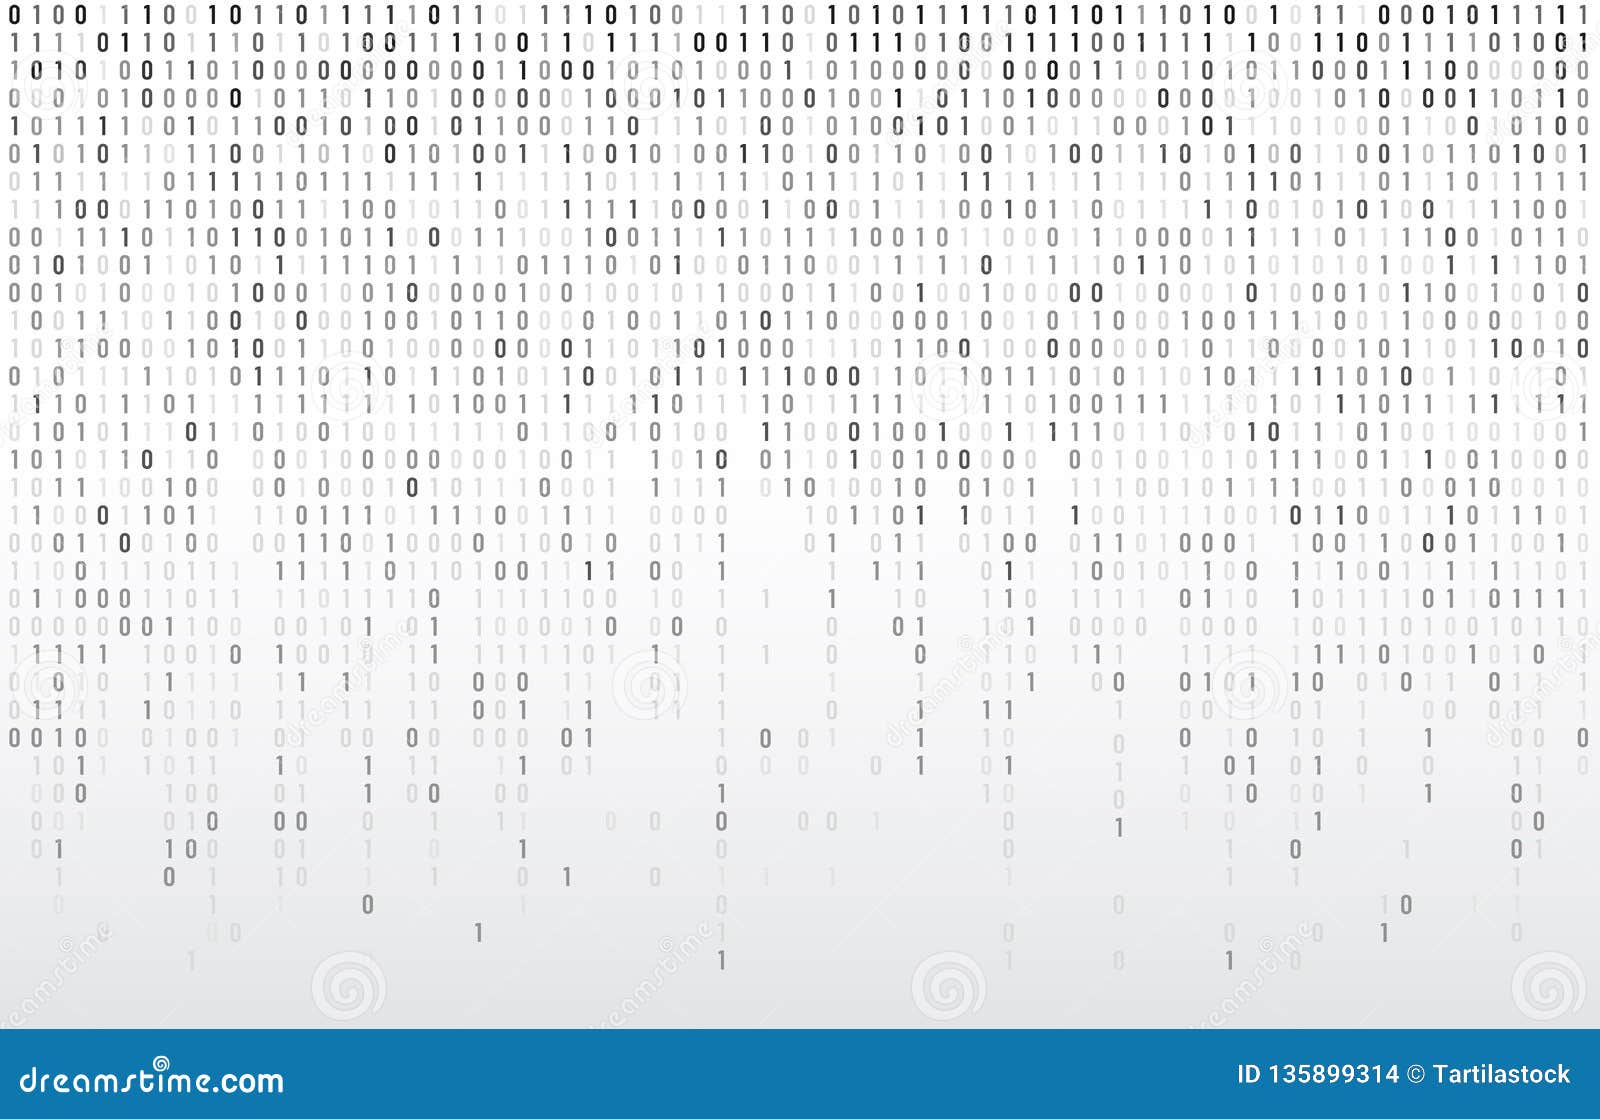 digital binary code. computer matrix data falling numbers, coding typography and codes stream gray  background